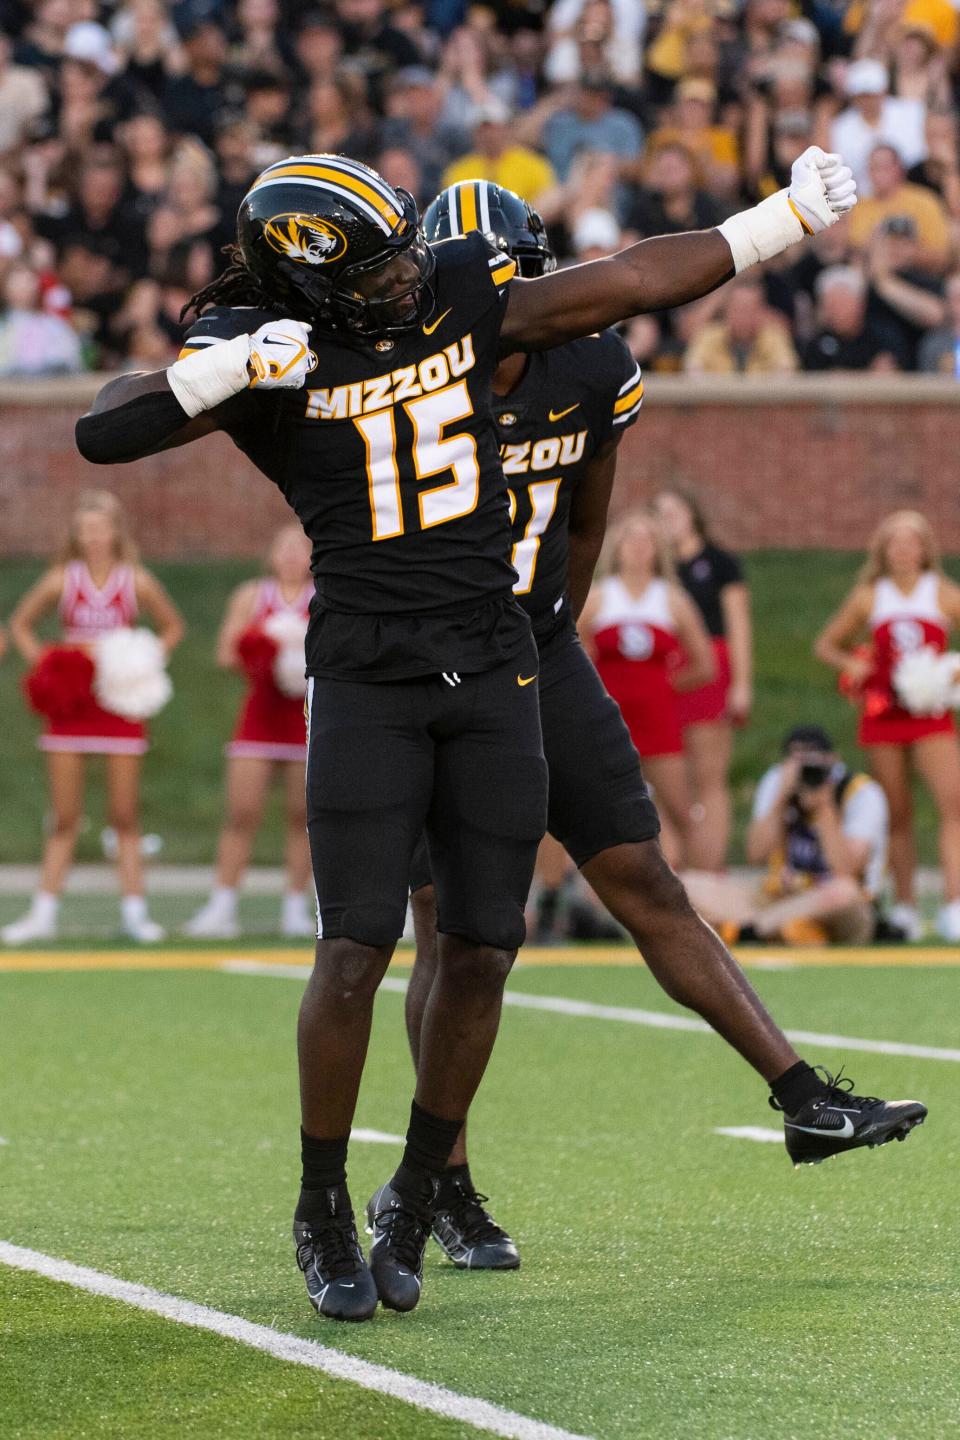 Missouri defensive lineman Johnny Walker Jr. celebrates a sack during the first quarter of an NCAA college football game against South Dakota Thursday, Aug. 31, 2023, in Columbia, Mo.